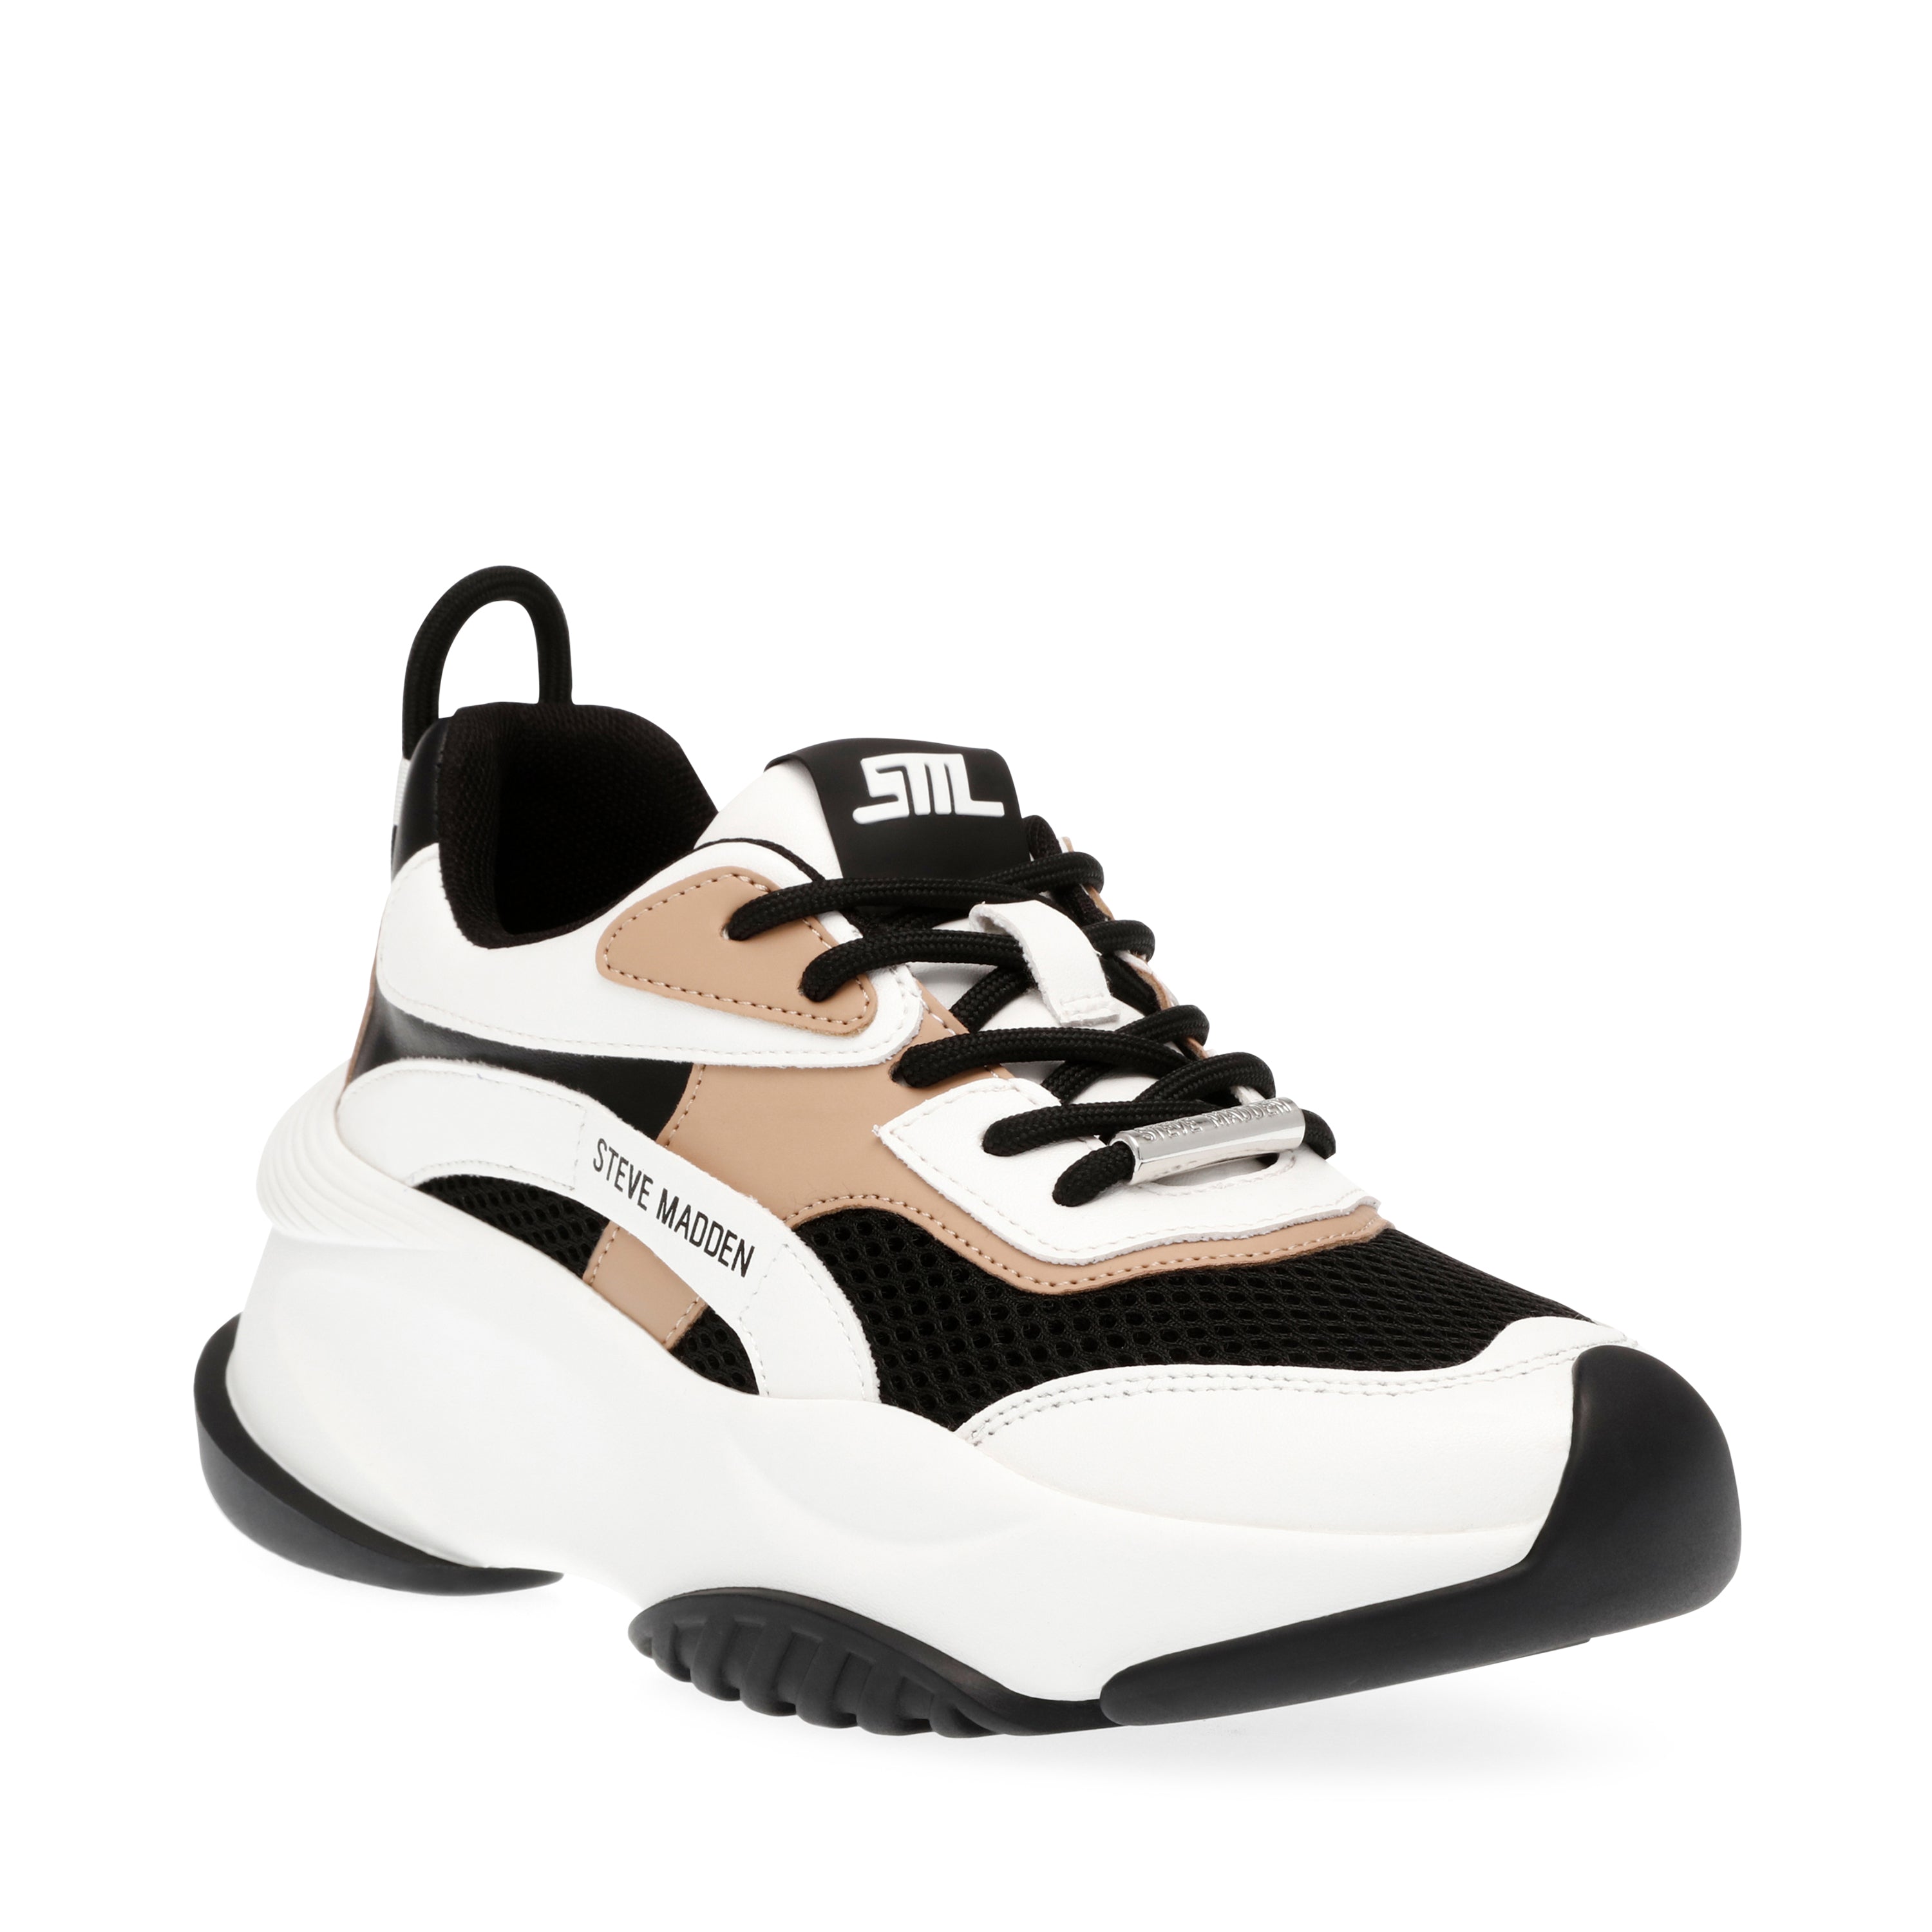 BELISSIMO BLACK/TAN SNEAKERS- Hover Image